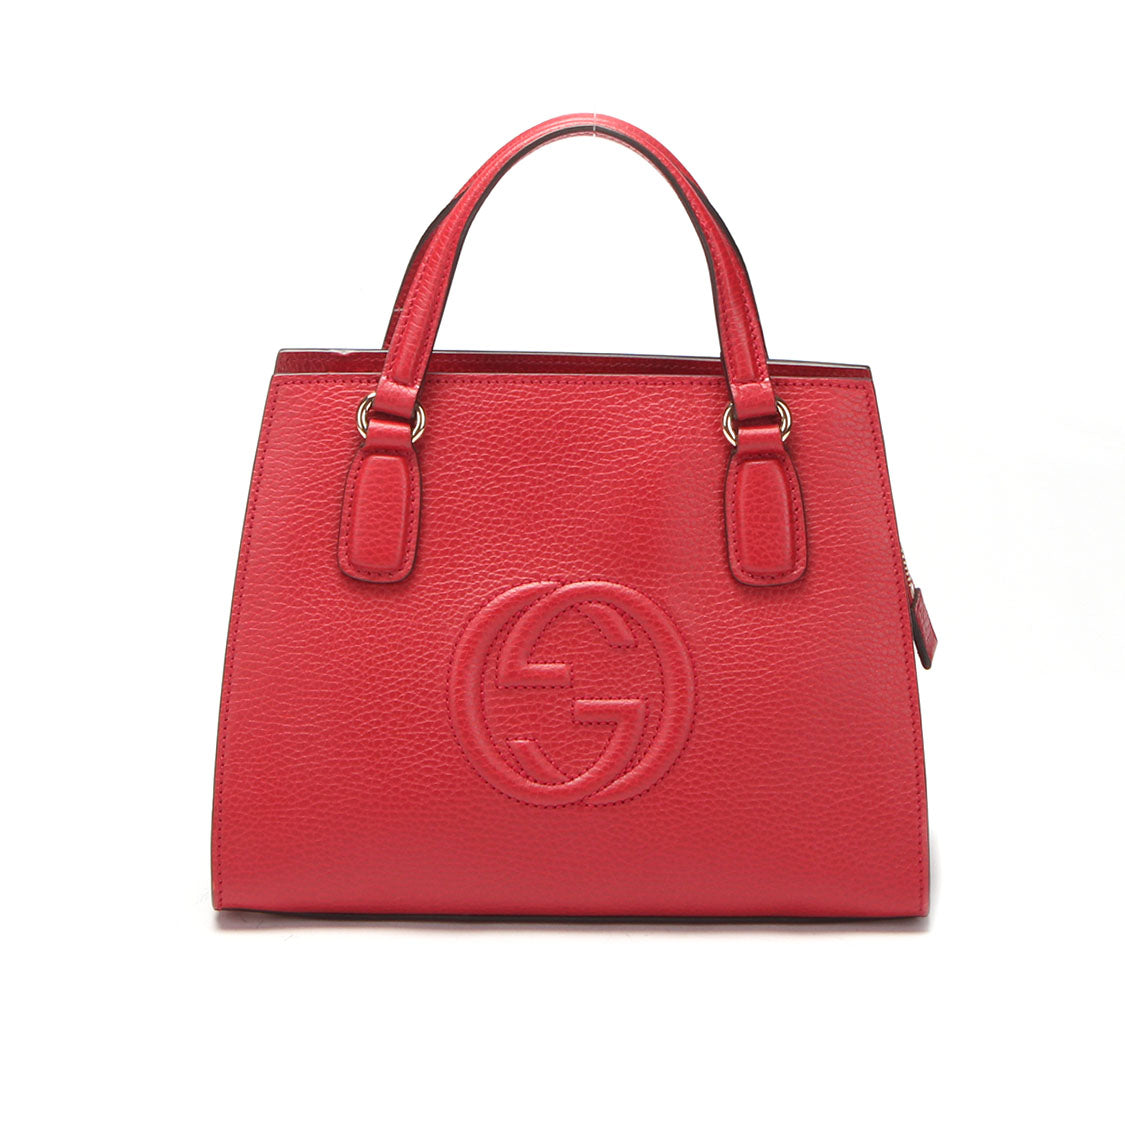 Gucci Leather Soho Satchel Leather Crossbody Bag in Excellent condition